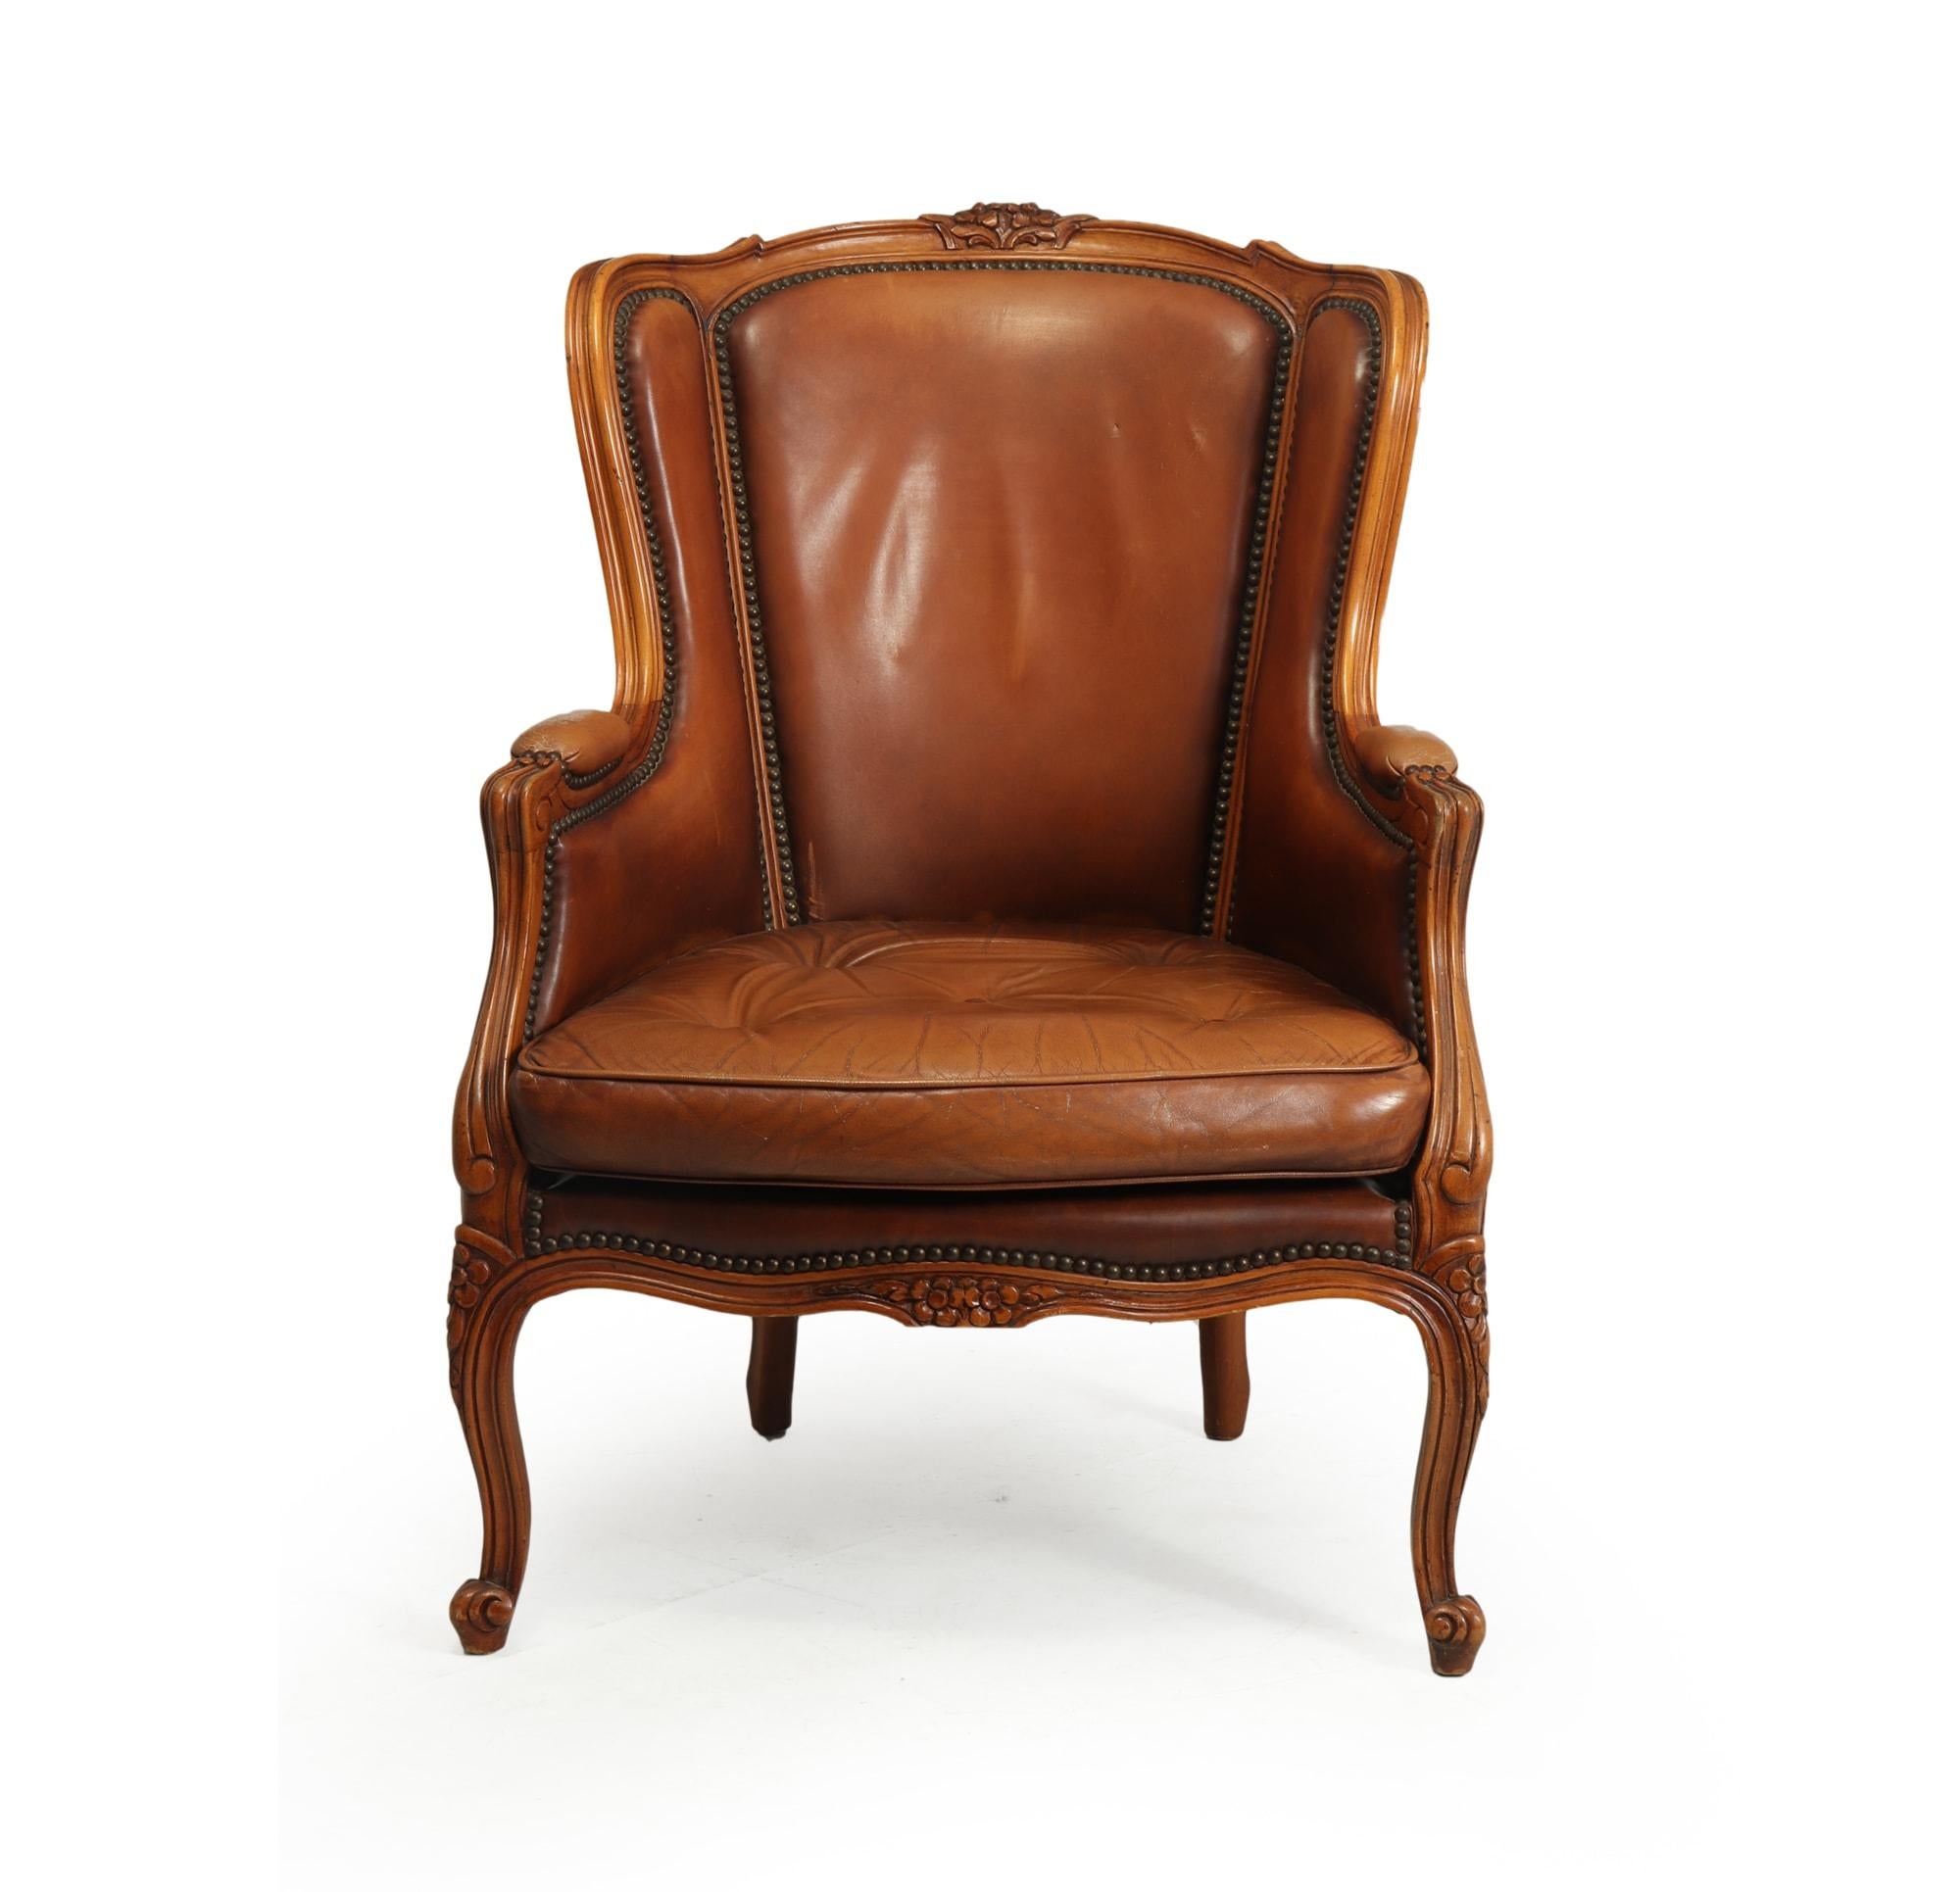 Produced in France in the mid 20th century, with leather buttoned seating area and back, to the outside is bergere caining, the caining is all in perfect condition age related wear to leather and frame, overall in very good original